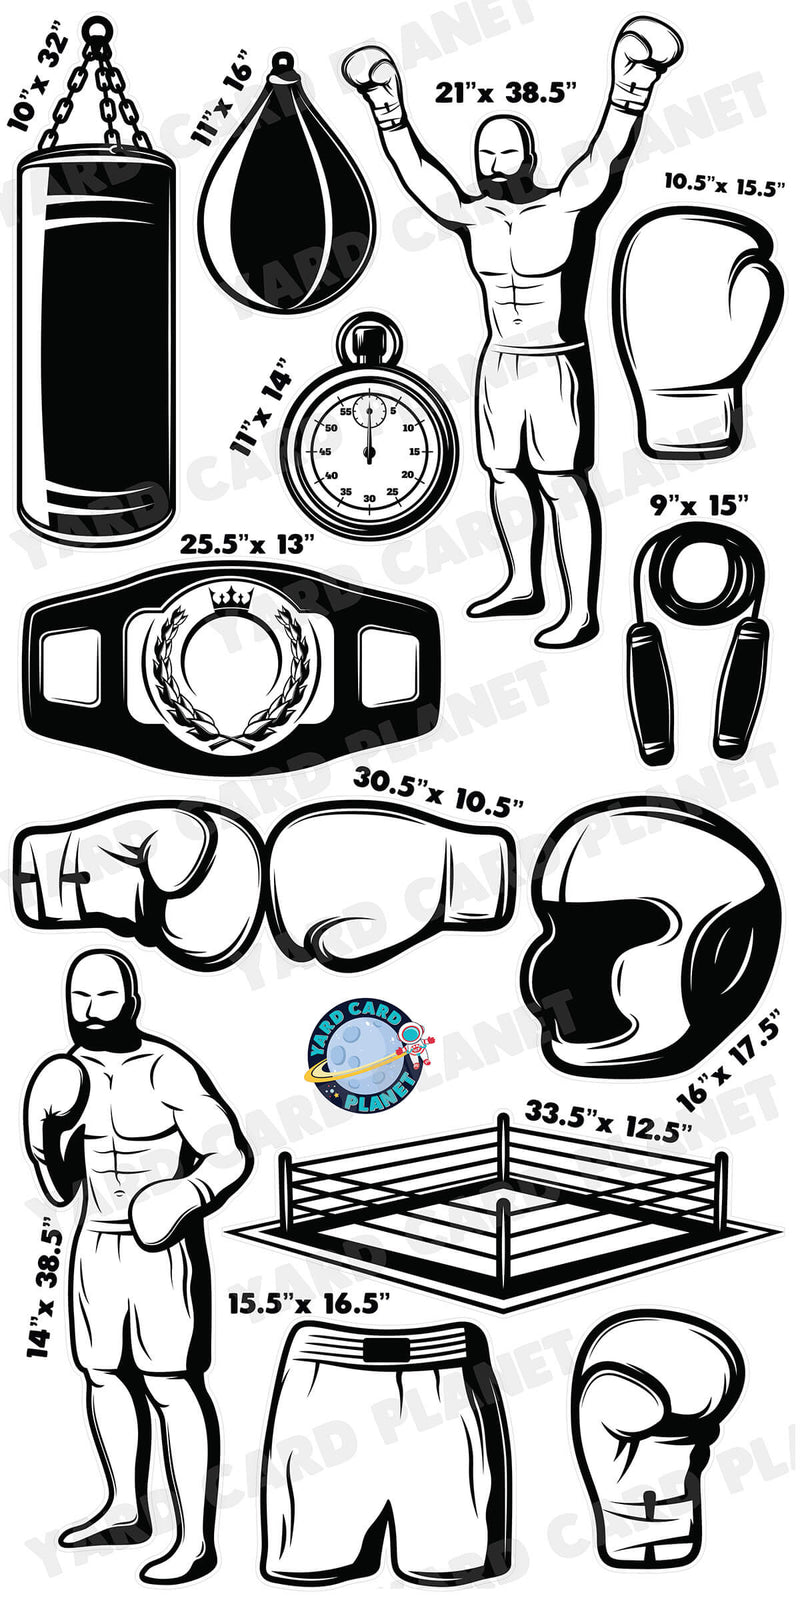 Boxing Silhouette Yard Card Flair Set with Measurements